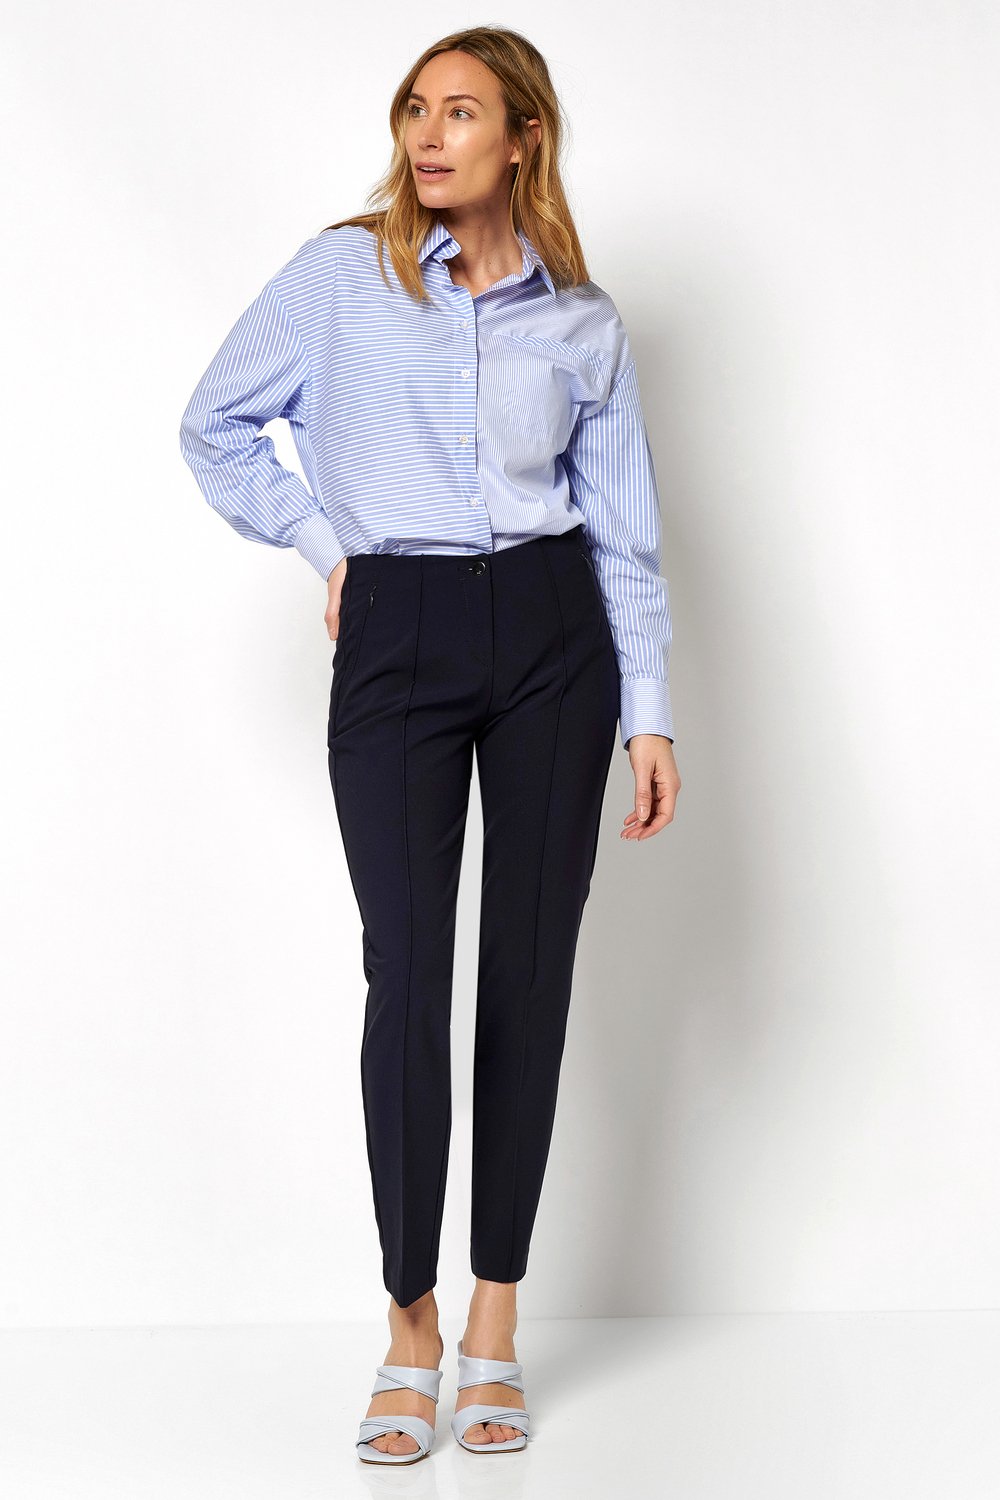 Slim-Fit business trousers | Style »Alessa« dark blue